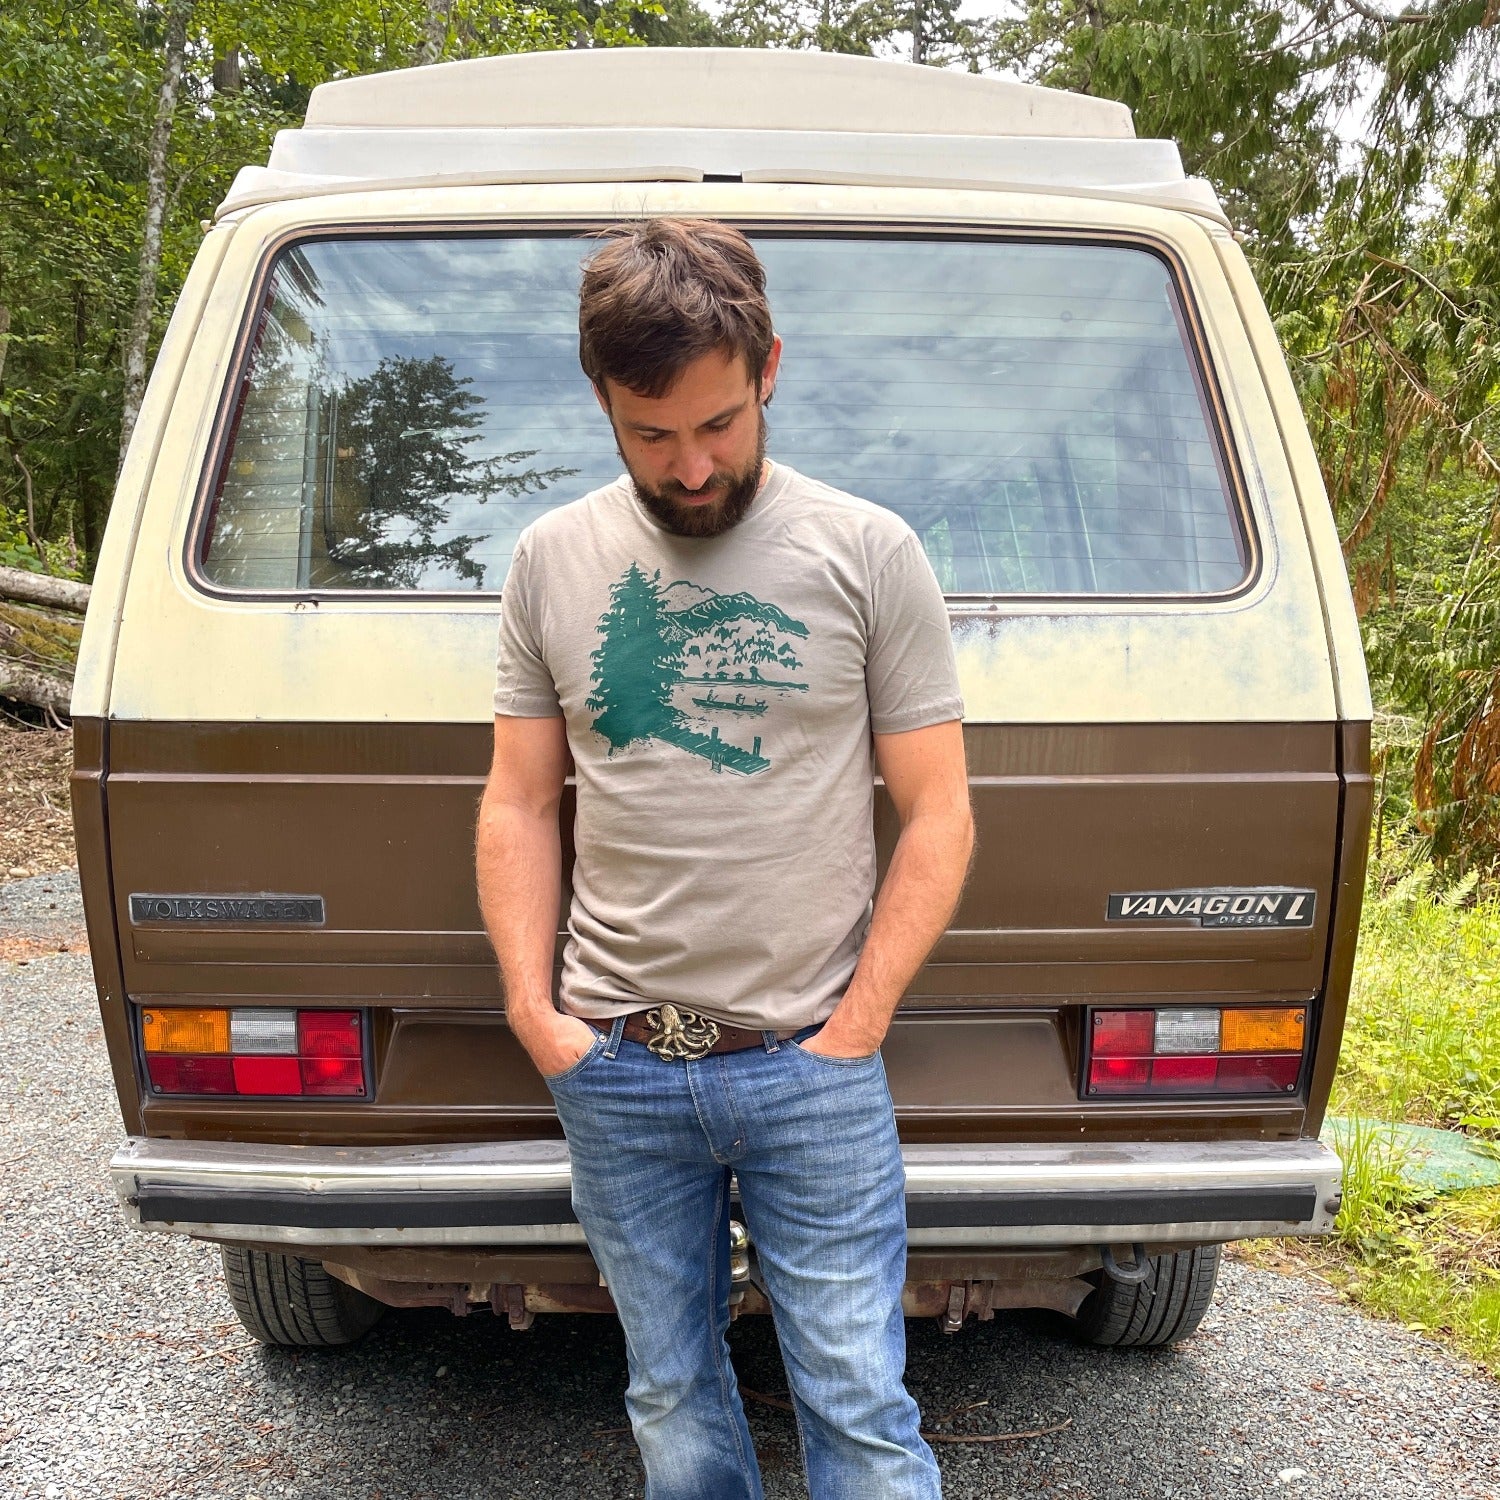 Man standing behind a VW can wearing a warm grey t-shirt with a green print of lakeside scene on it. 